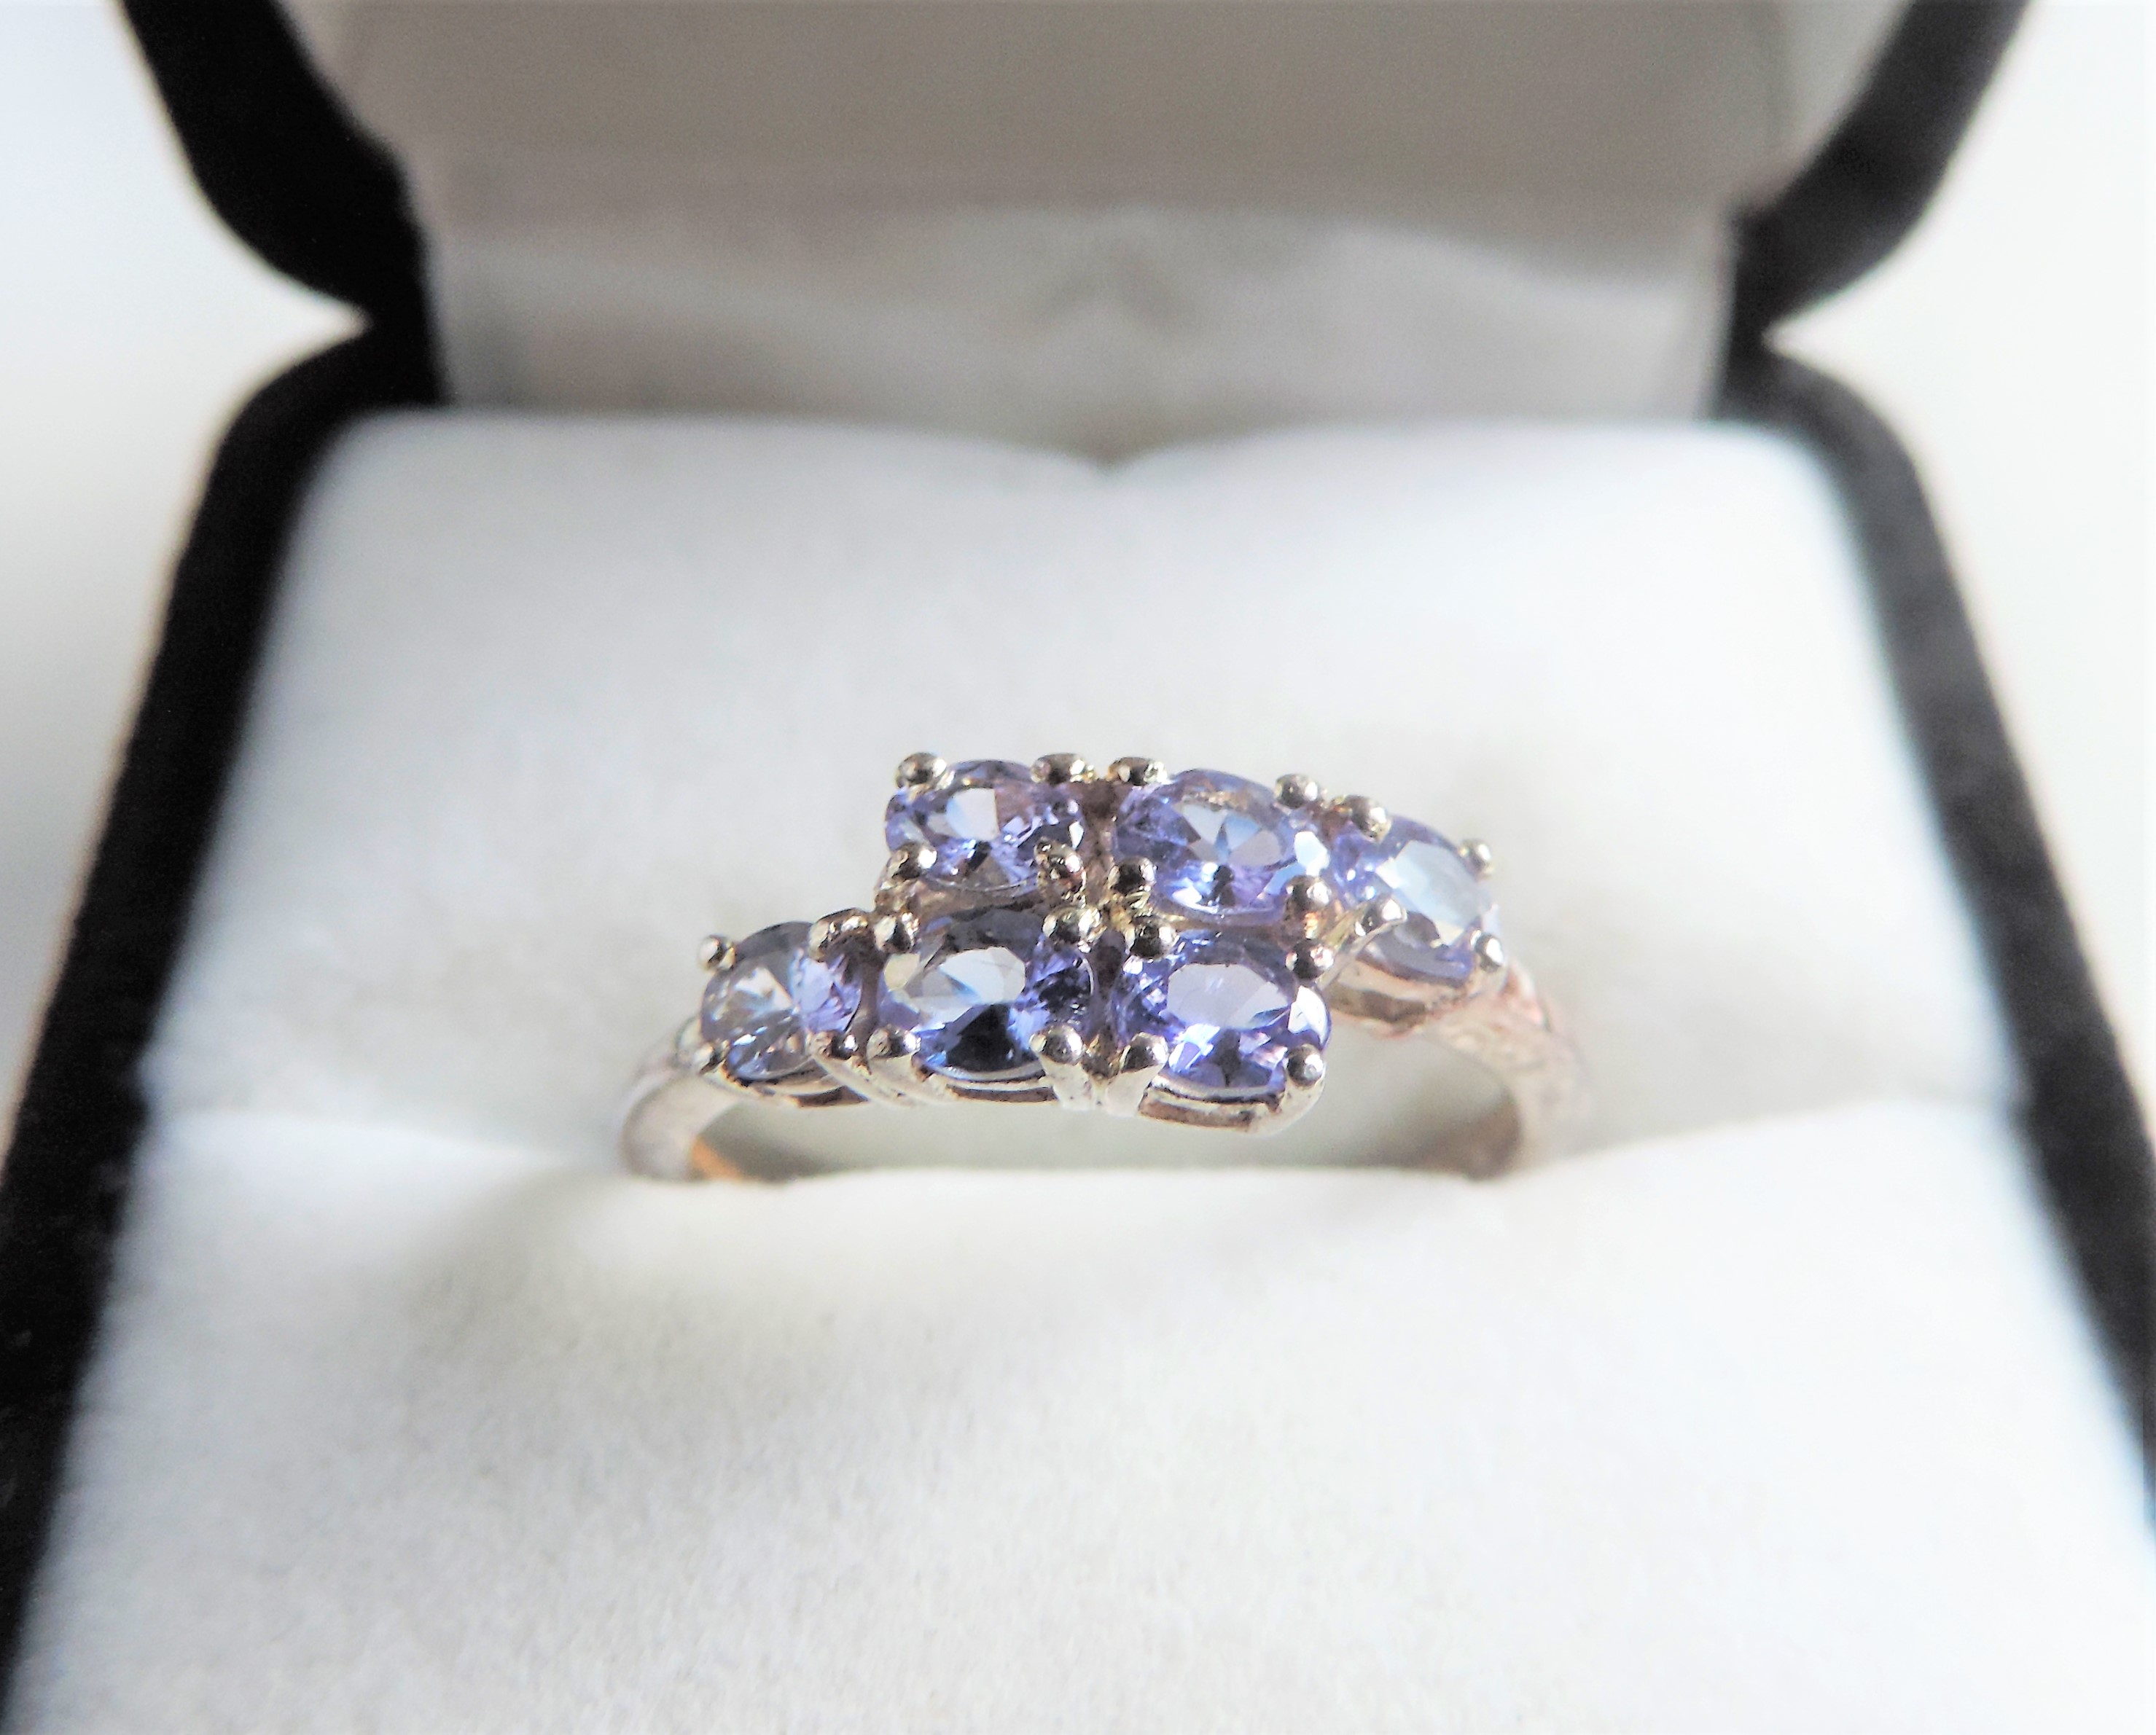 Sterling Silver Tanzanite Gemstone Ring 'NEW' with Gift Pouch - Image 3 of 3